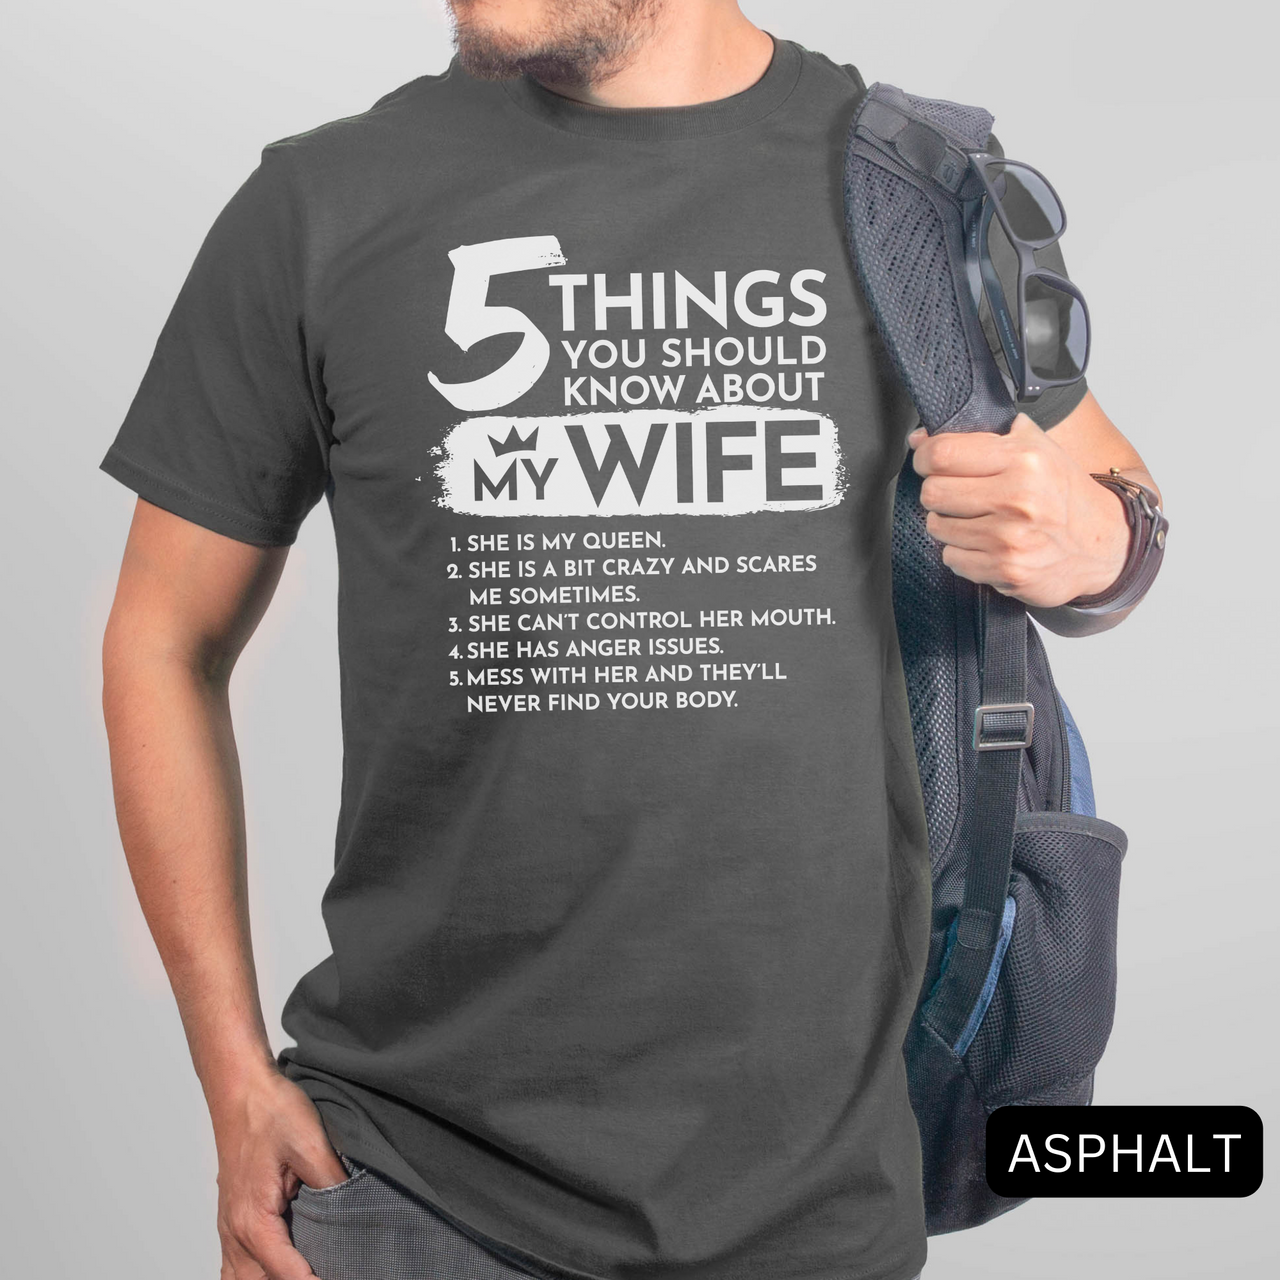 5 things you should know about my wife asphalt shirt